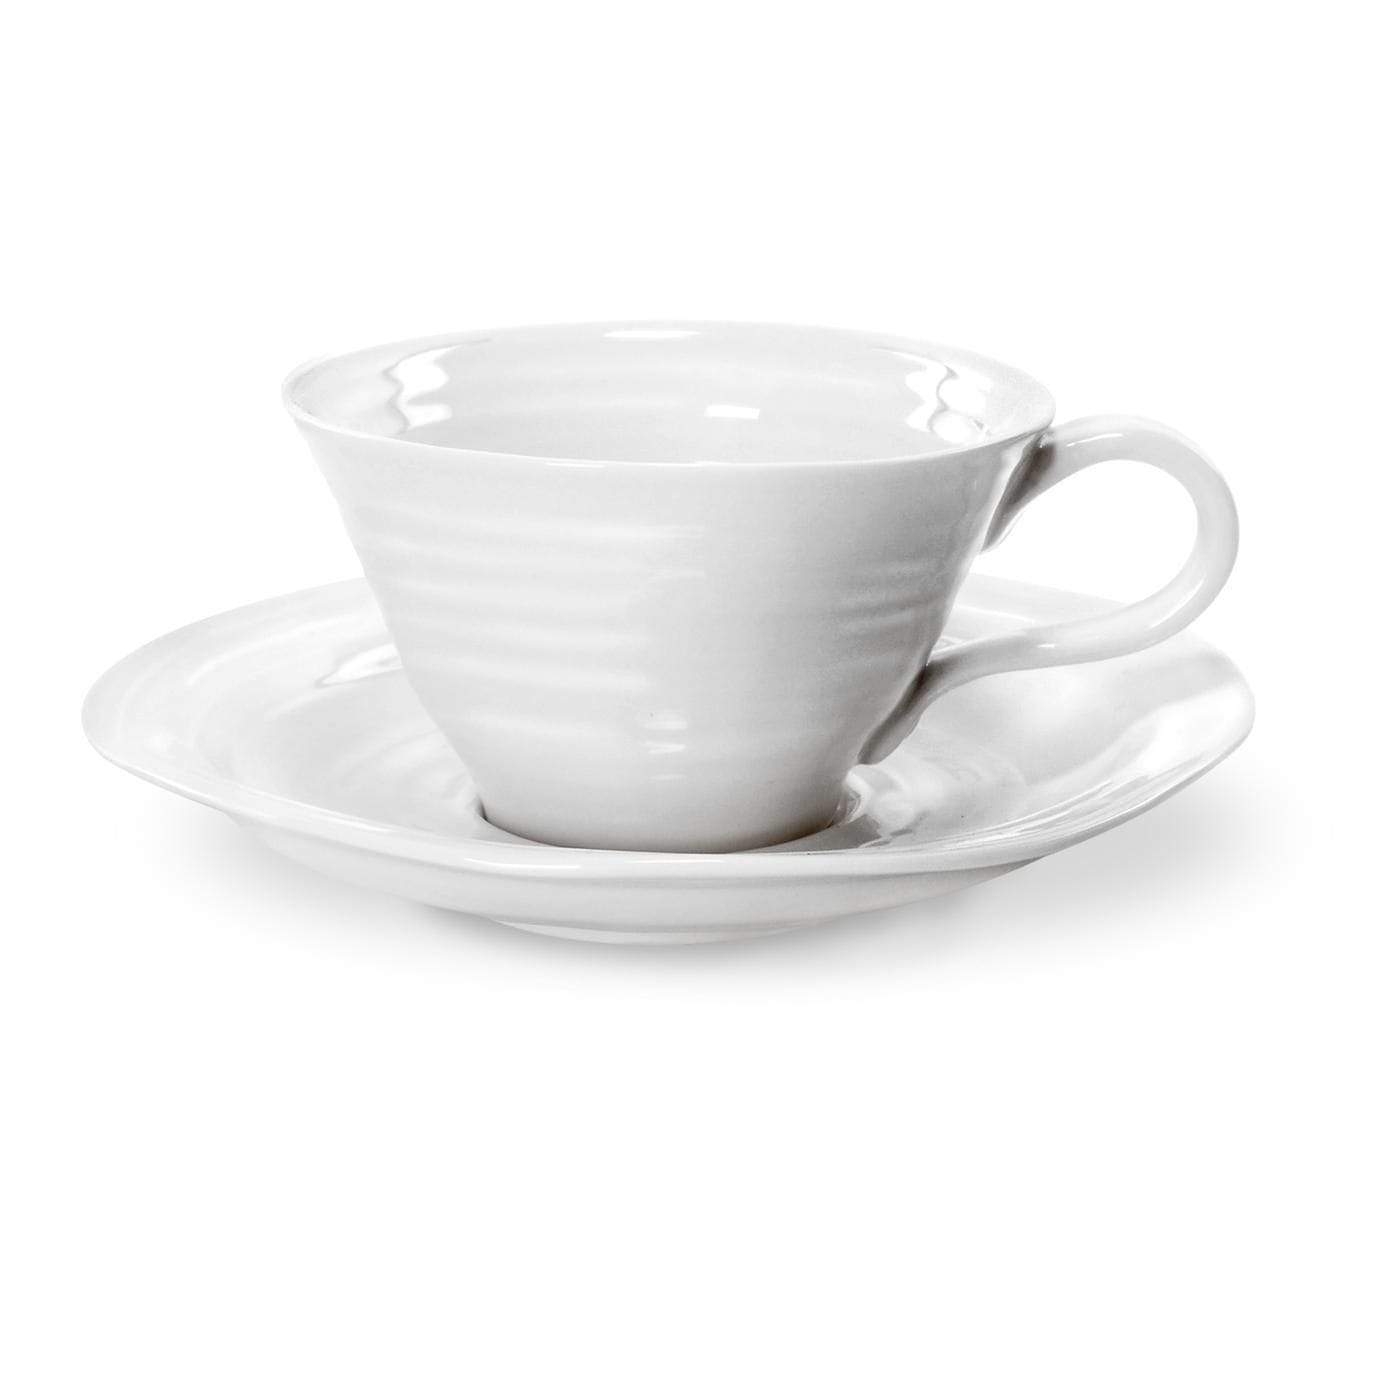 Sophie Conran for Portmeirion White Tea Cup and Saucer Set of 4